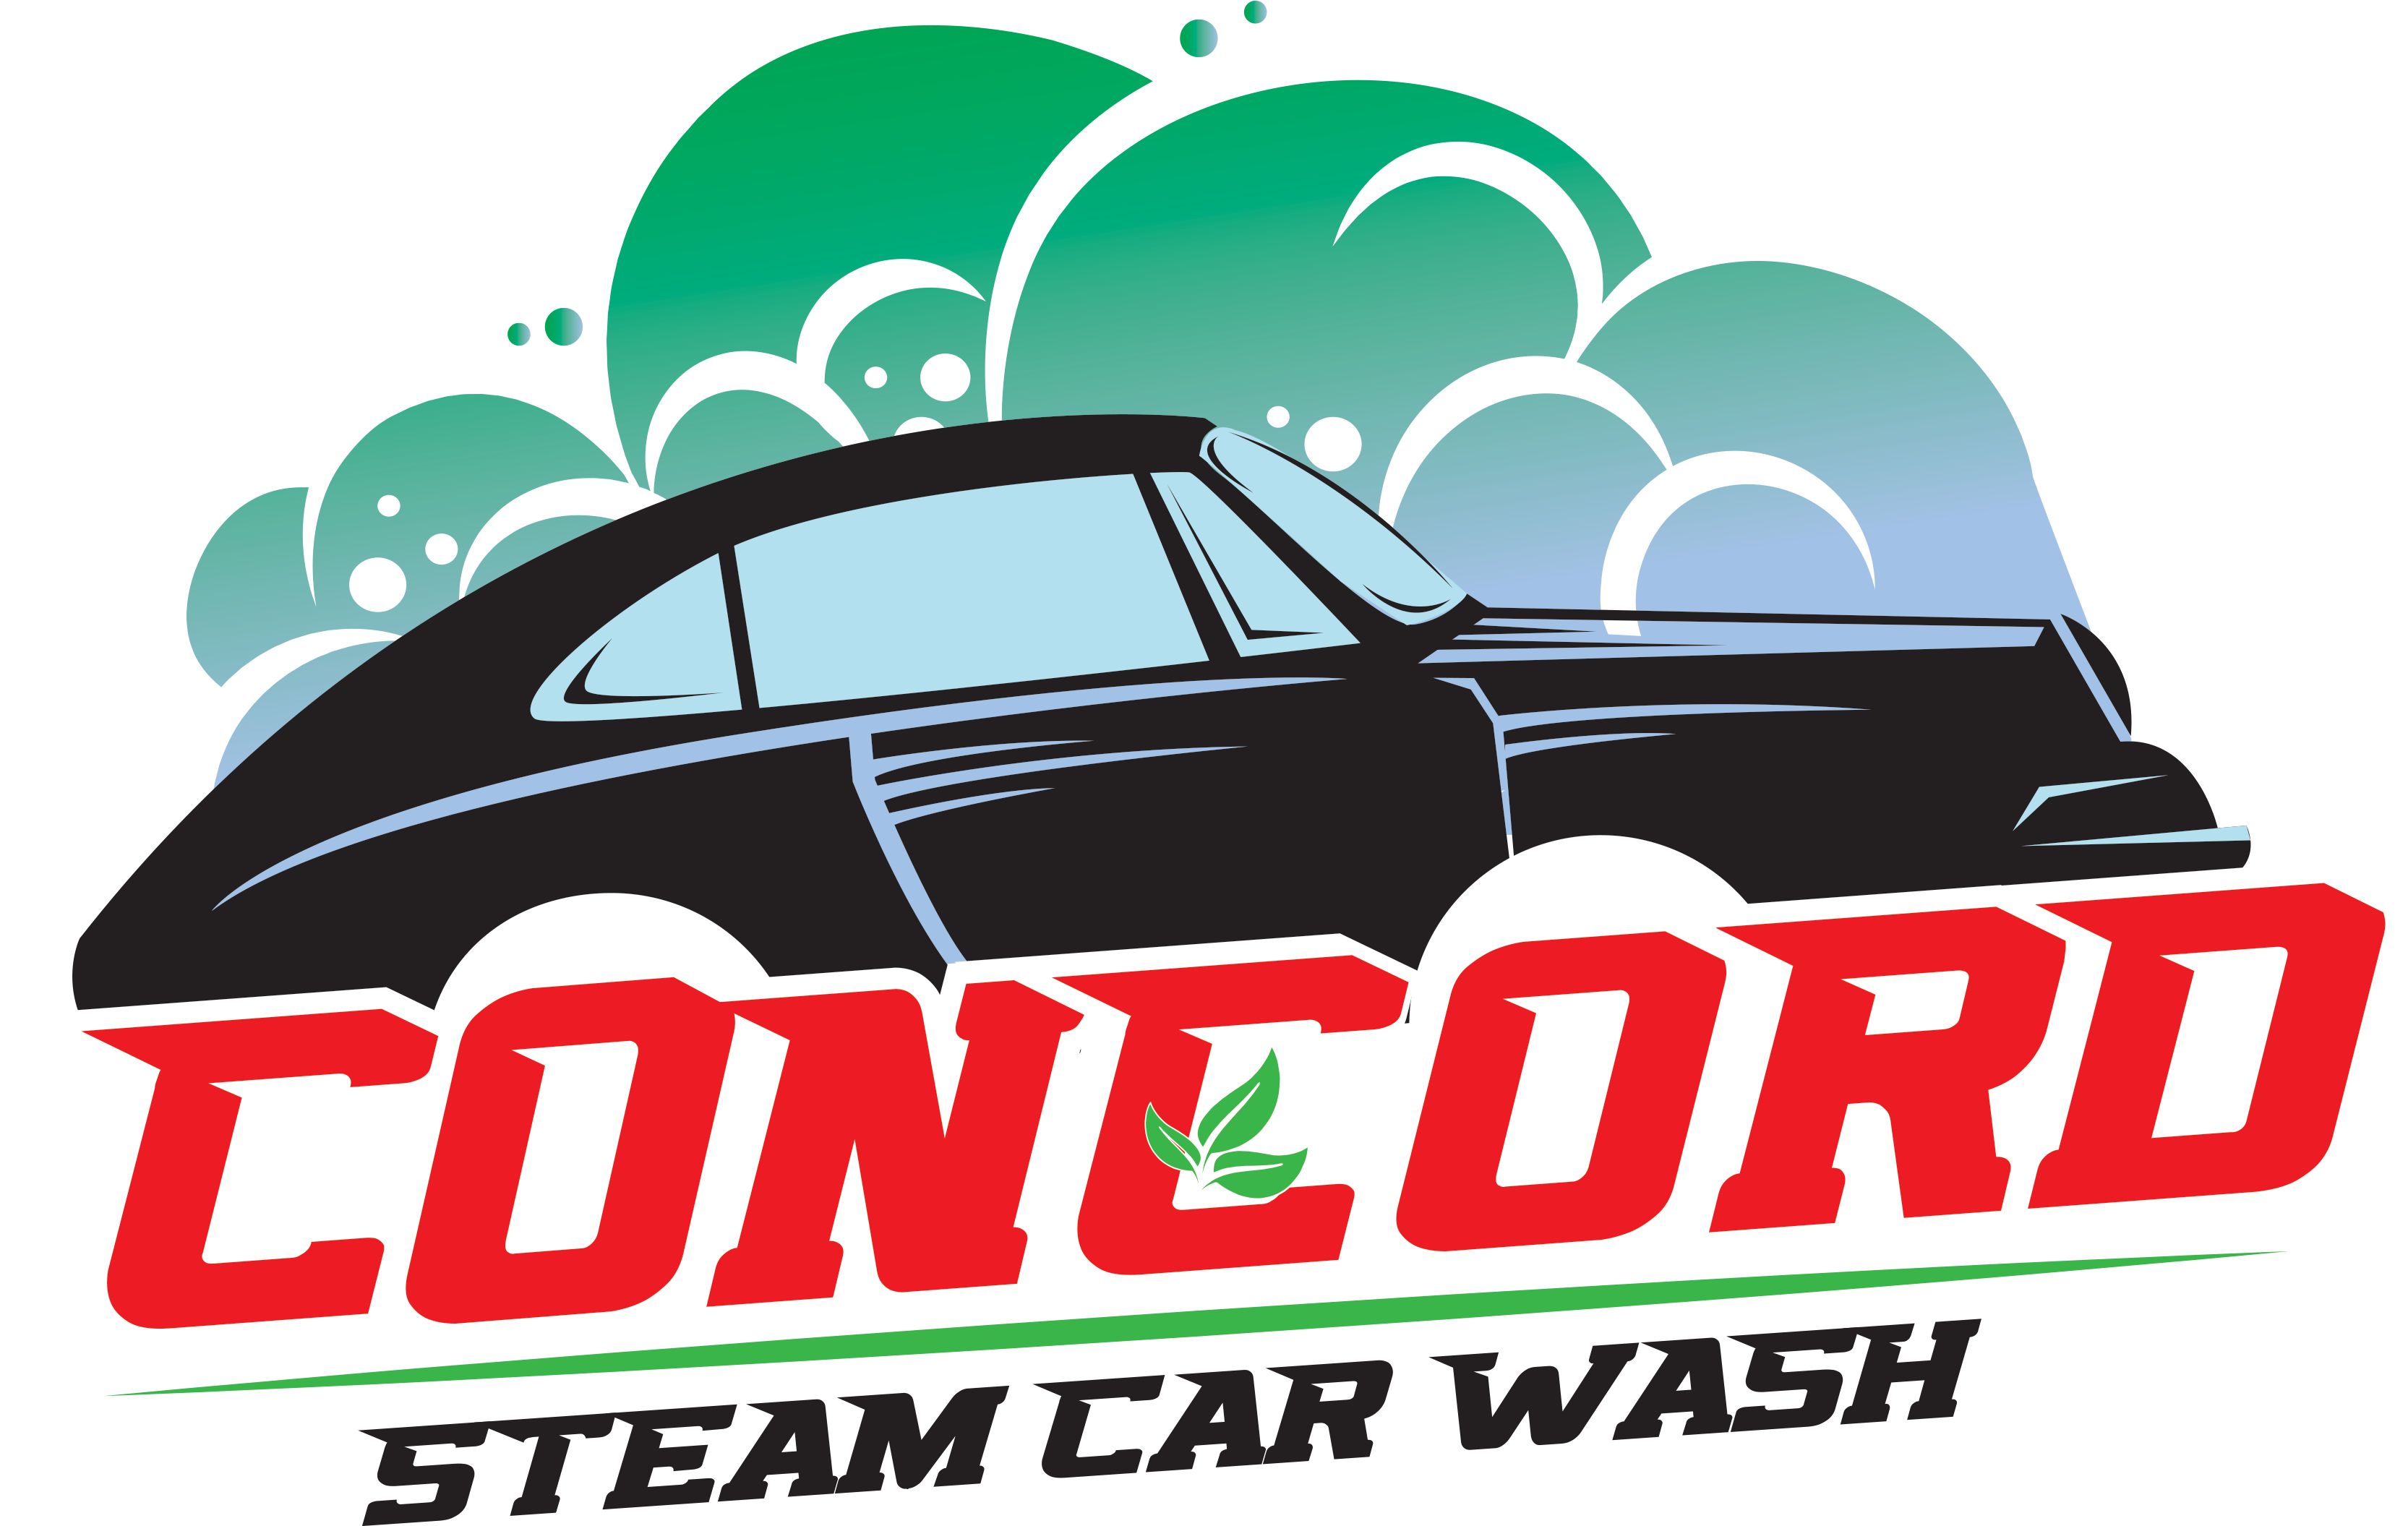 A Car Wash Logo With Text And Green Bubbles